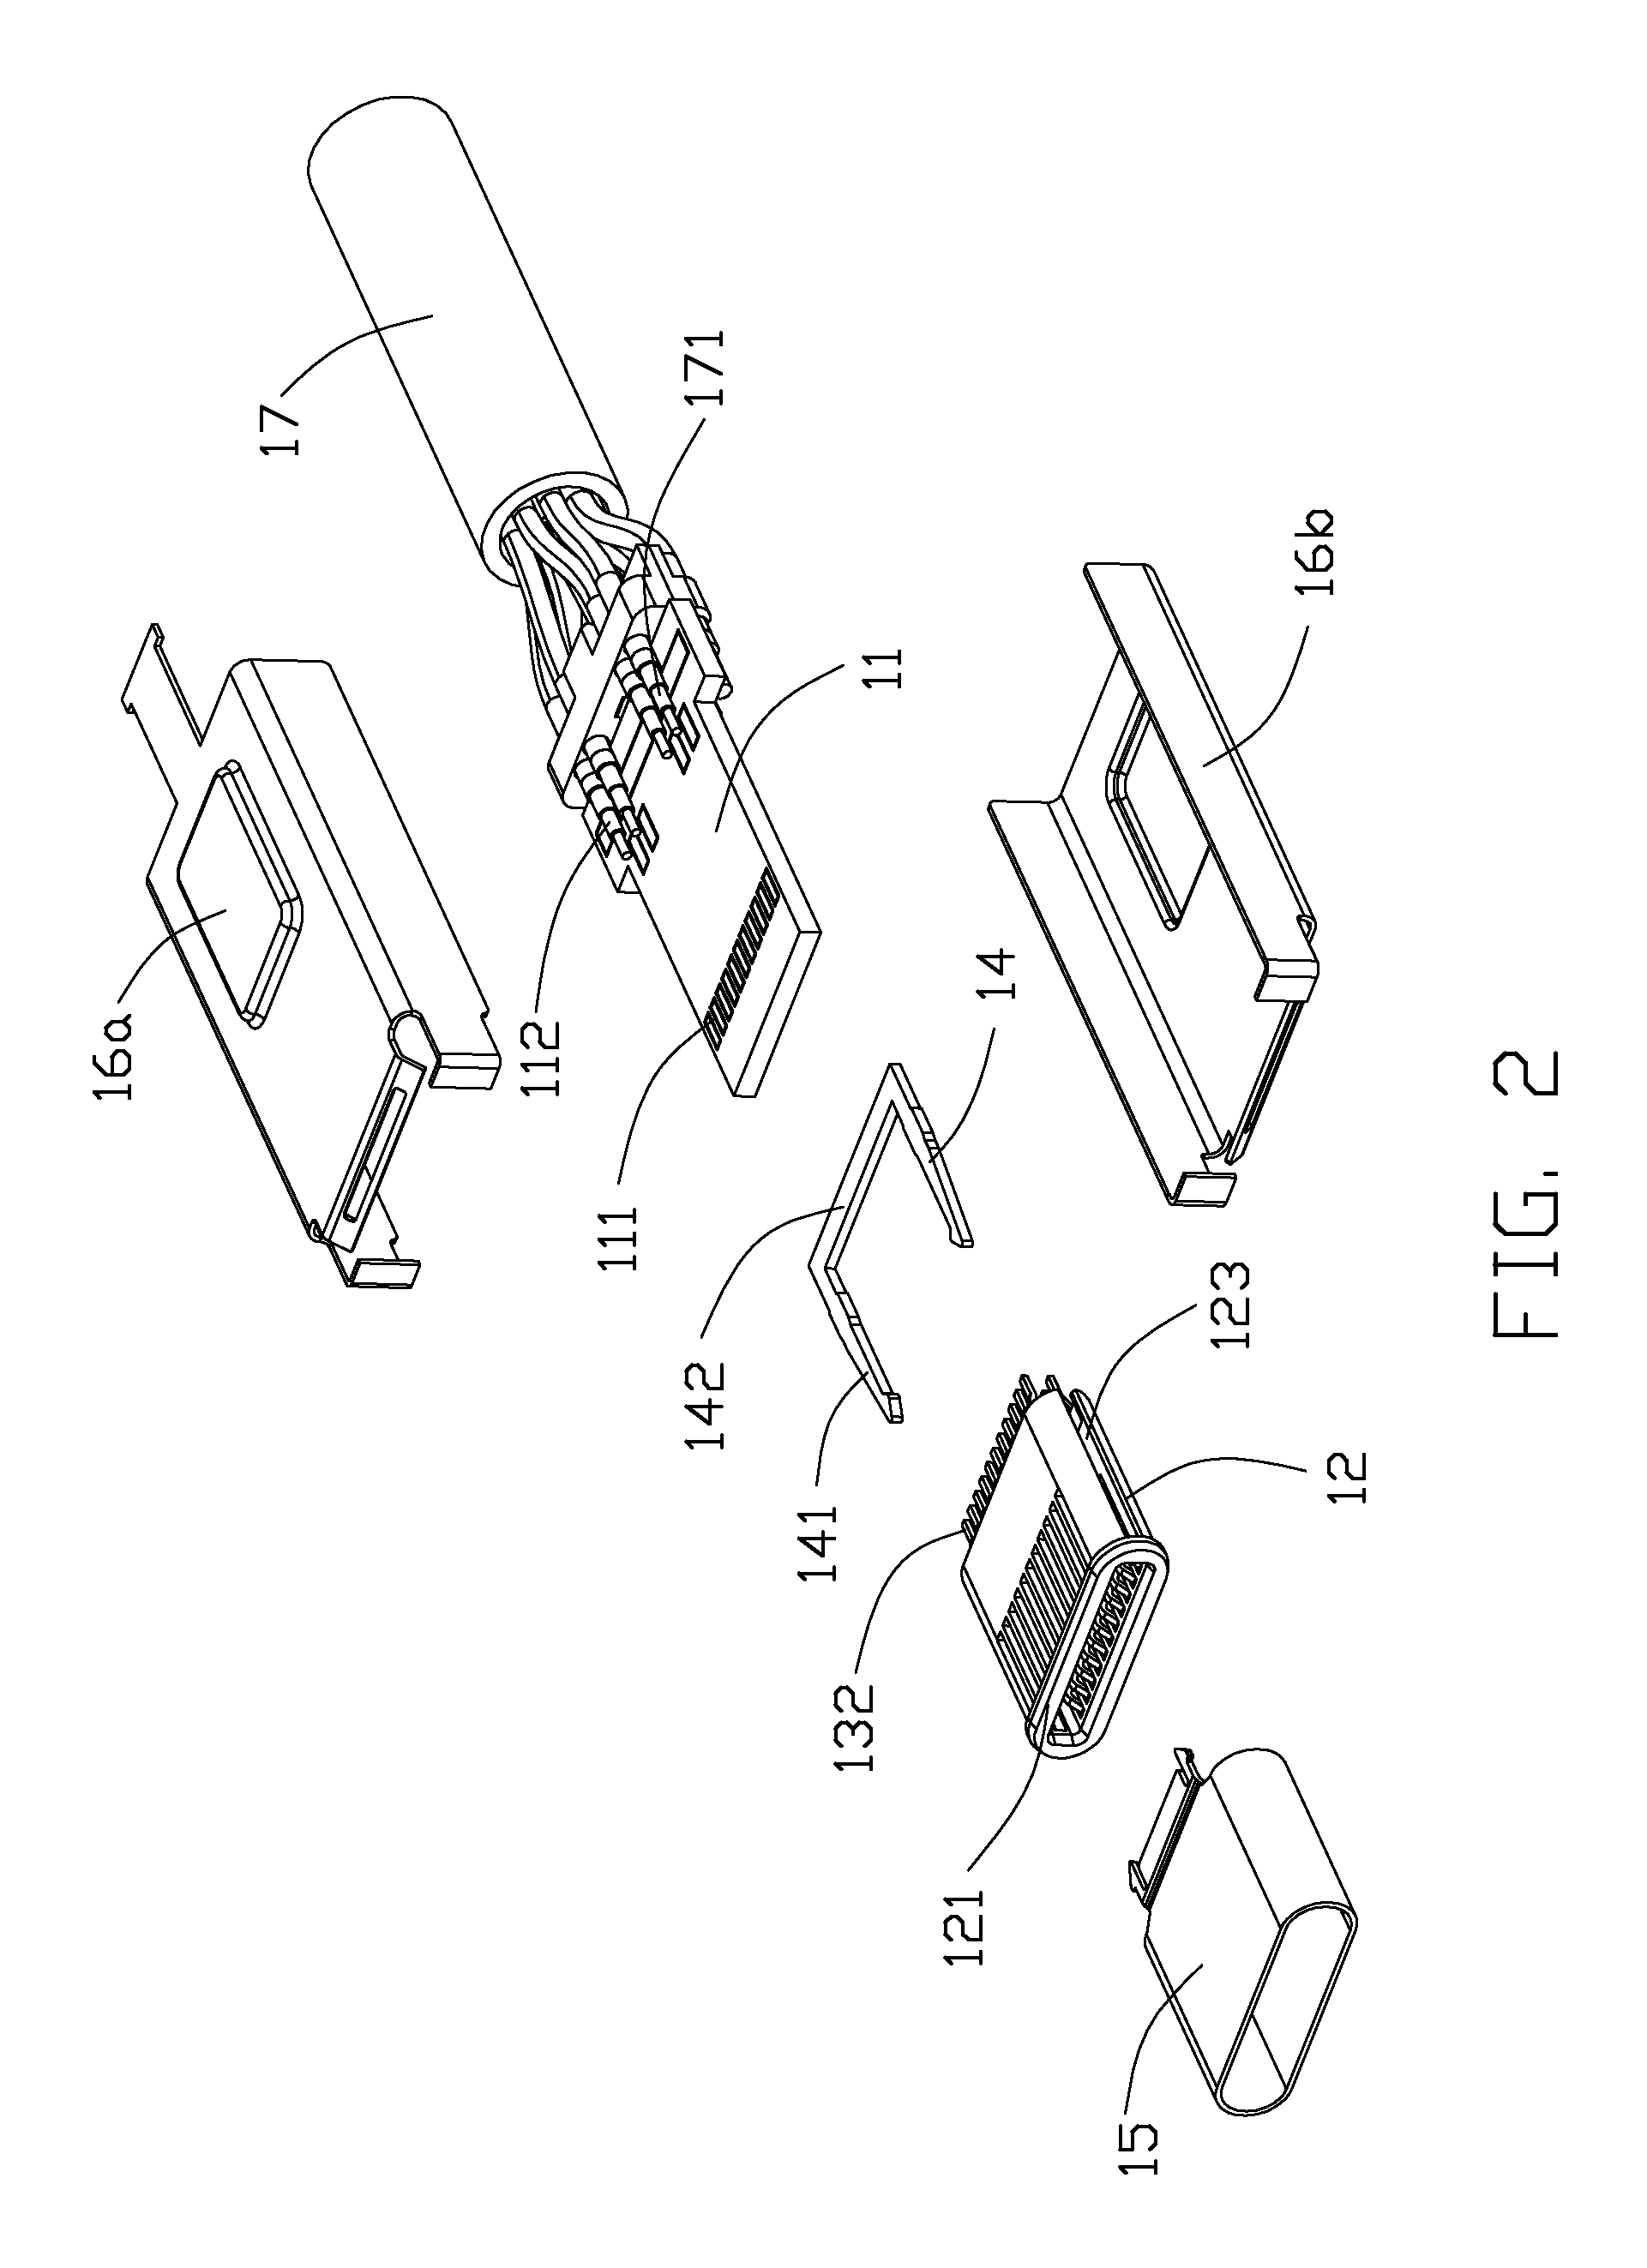 Electrical connector having a receptacle with a shielding plate and a mating plug with metallic side arms